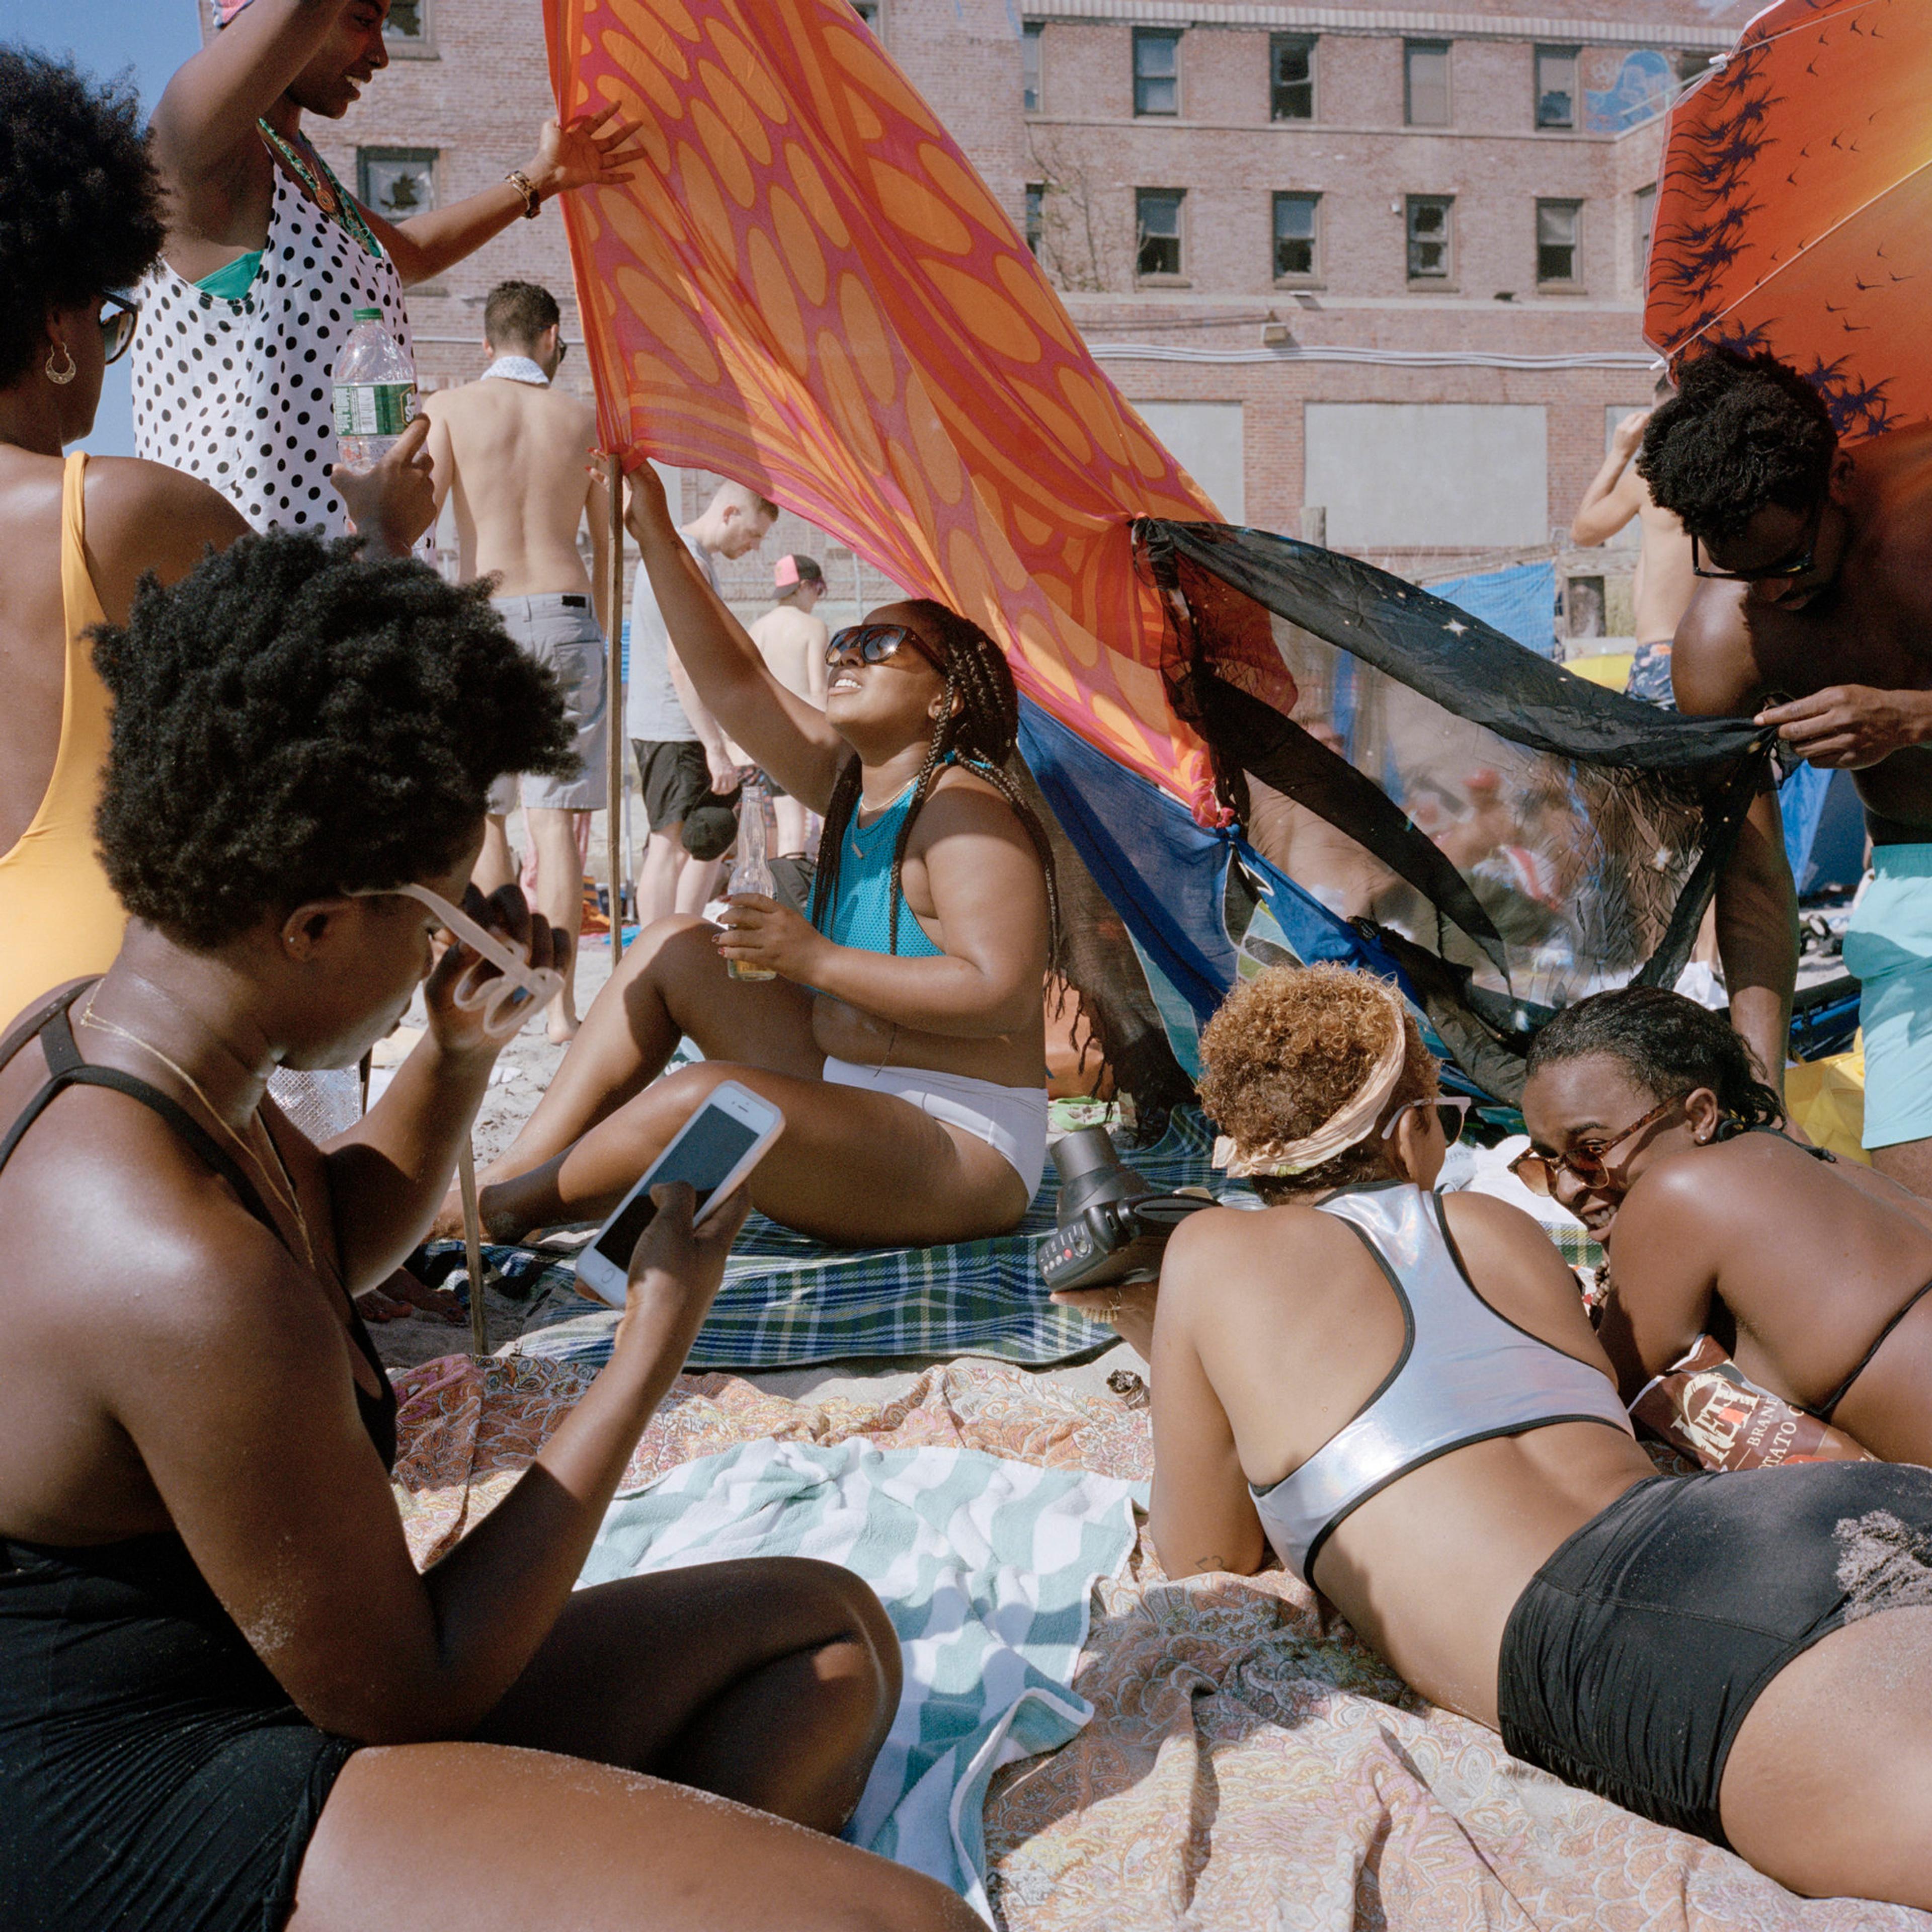 A photograph of a group of women lounging on the beach and conversing